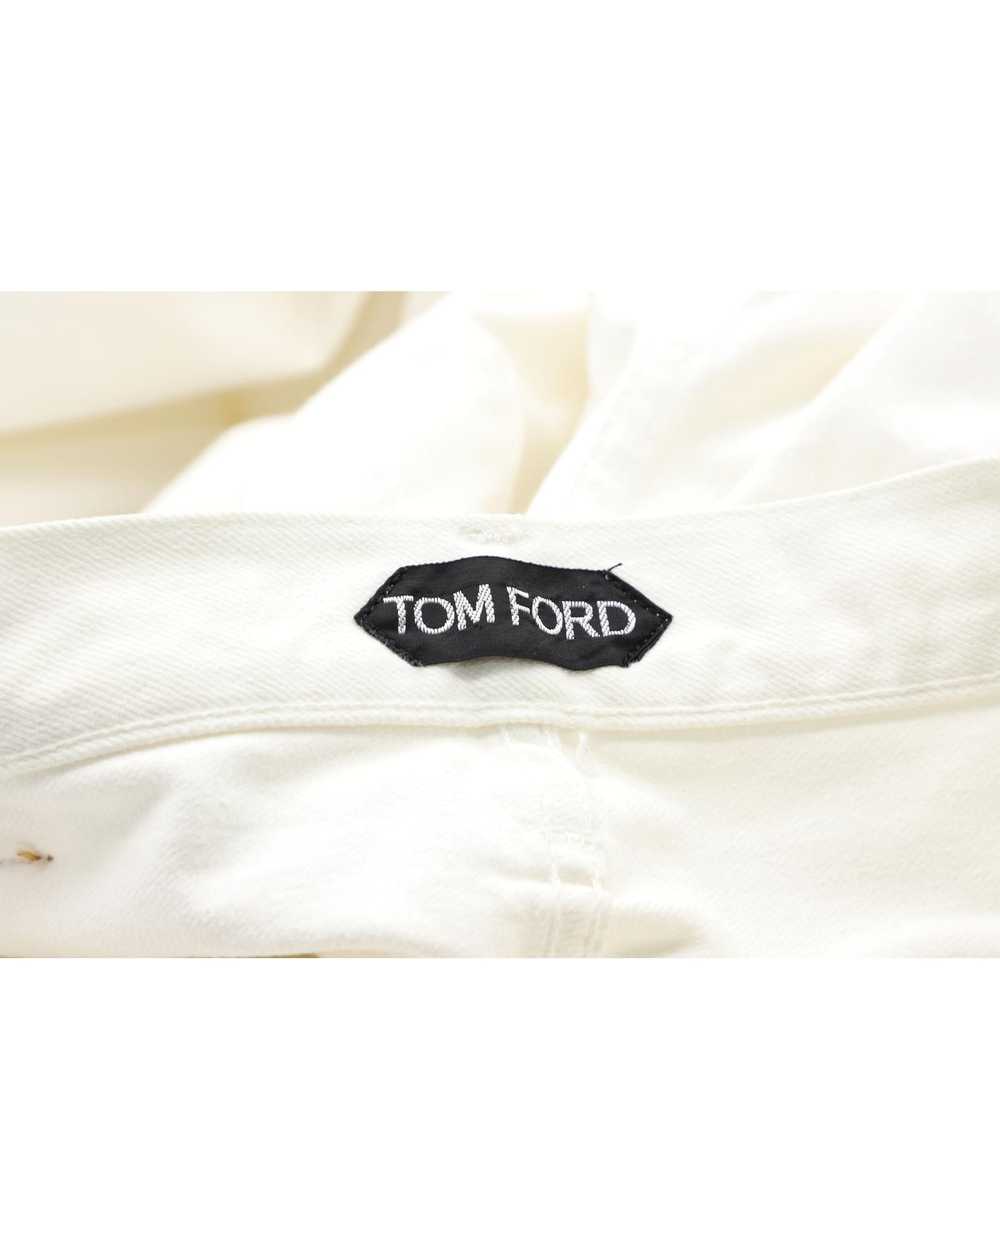 Tom Ford Straight Fit Jeans in White Cotton - image 2